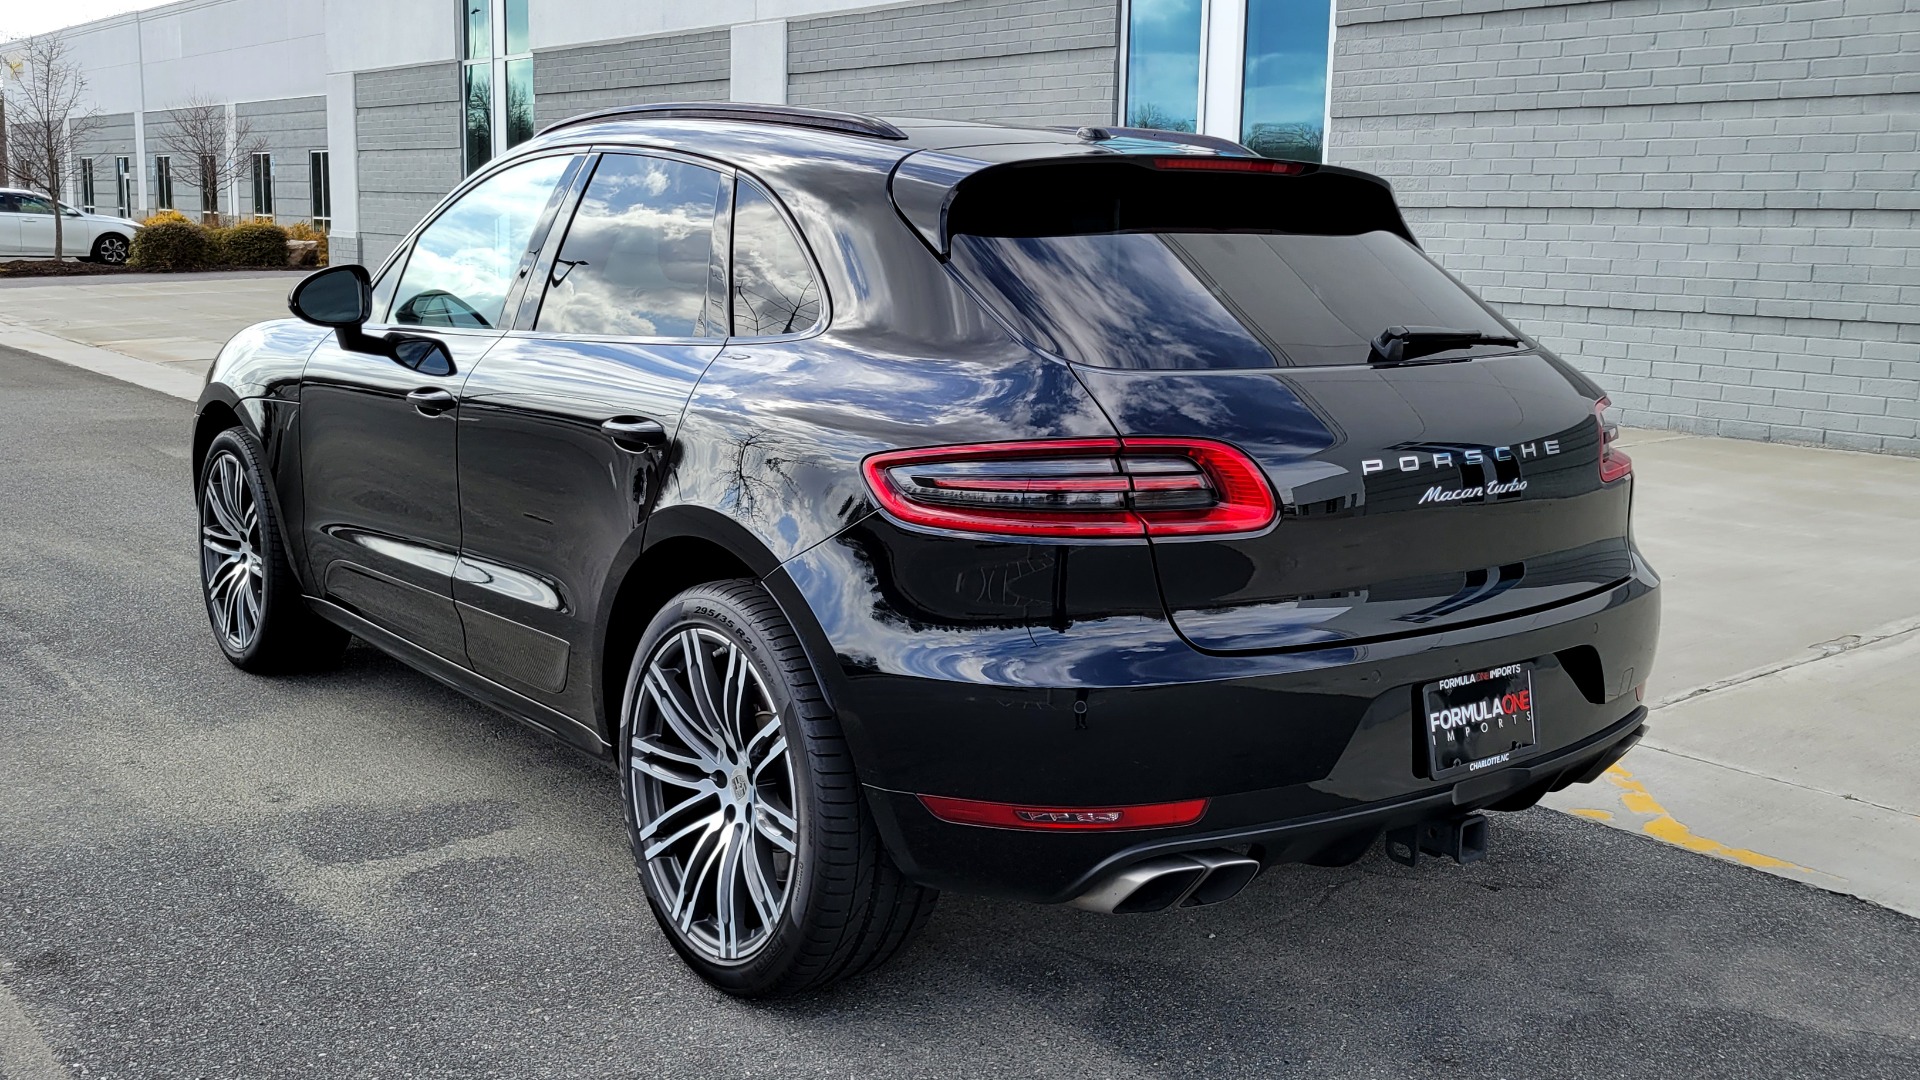 Used 2016 Porsche MACAN TURBO 3.6L PREMIUM / NAV / BOSE / SUNROOF / REARVIEW for sale Sold at Formula Imports in Charlotte NC 28227 5